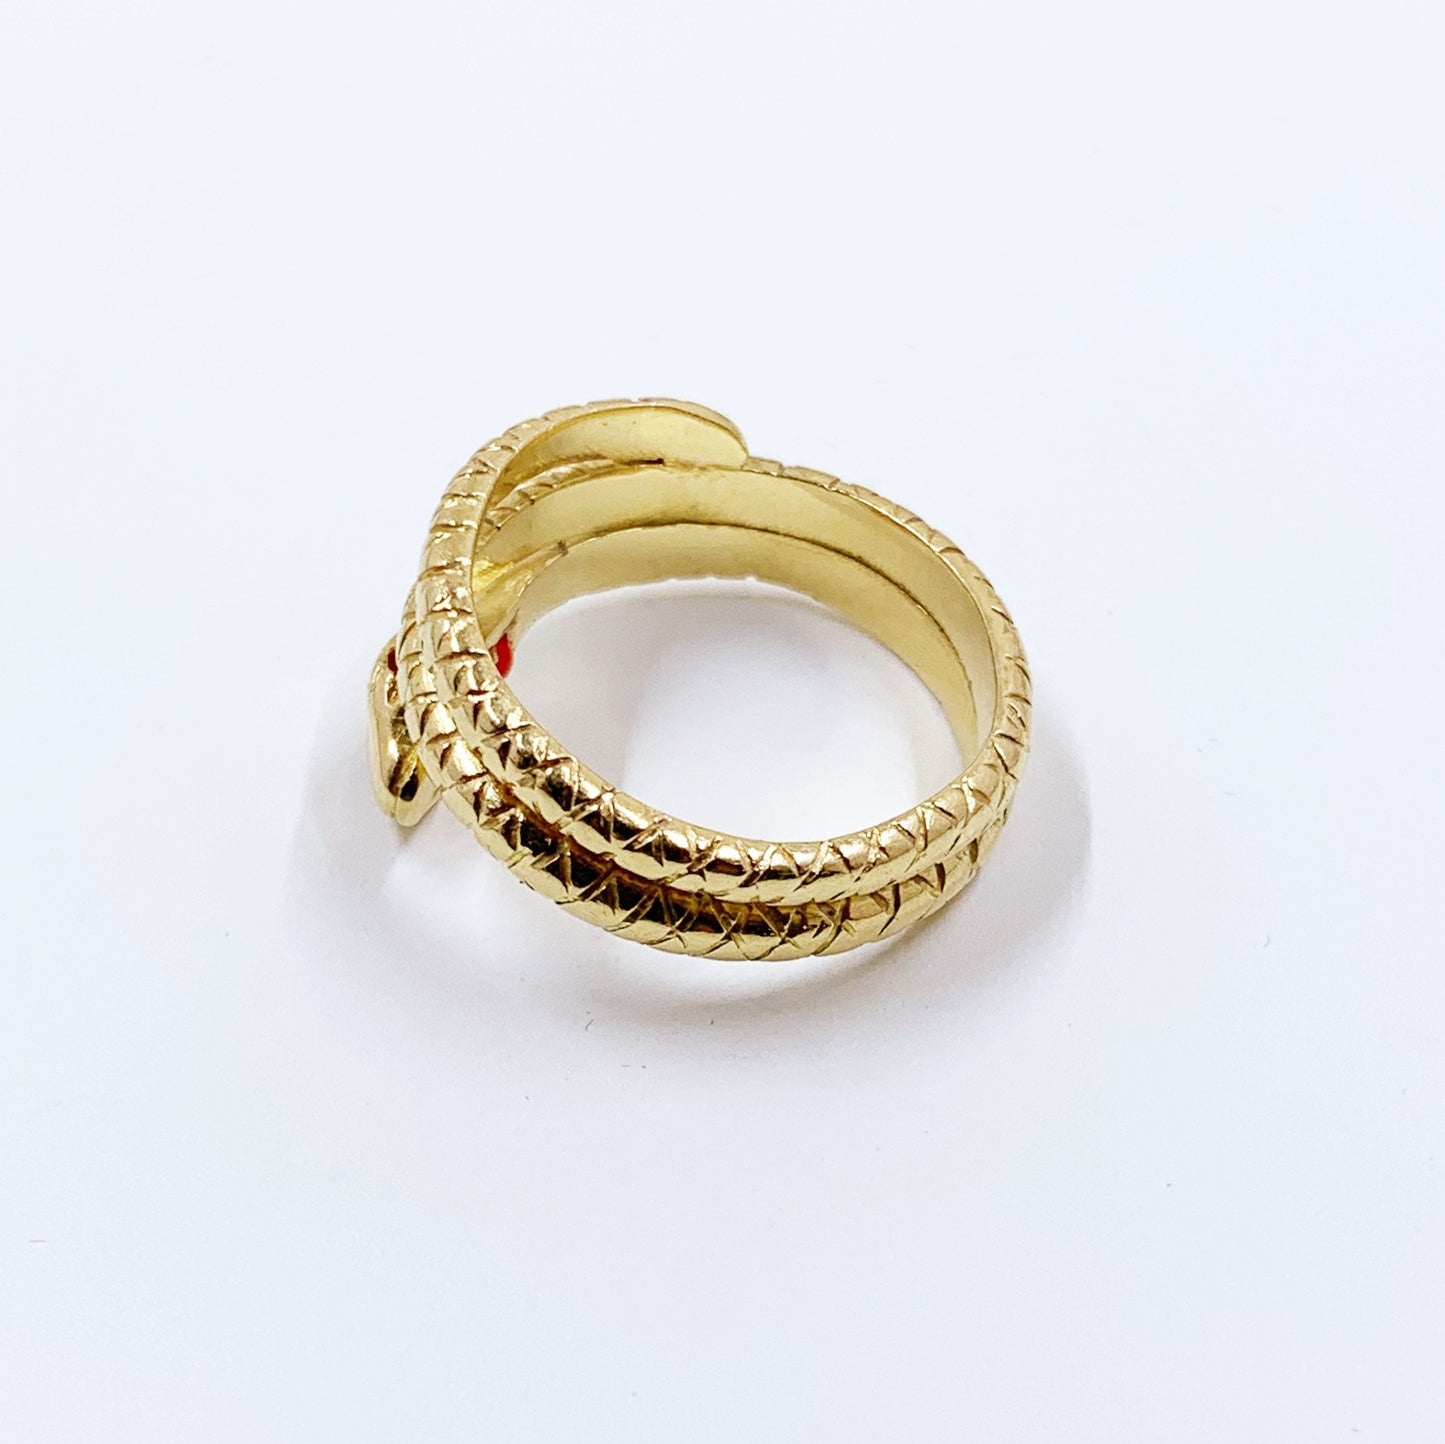 Vintage 14K Gold and Coral Coiled Snake Ring | Size 7 1/4